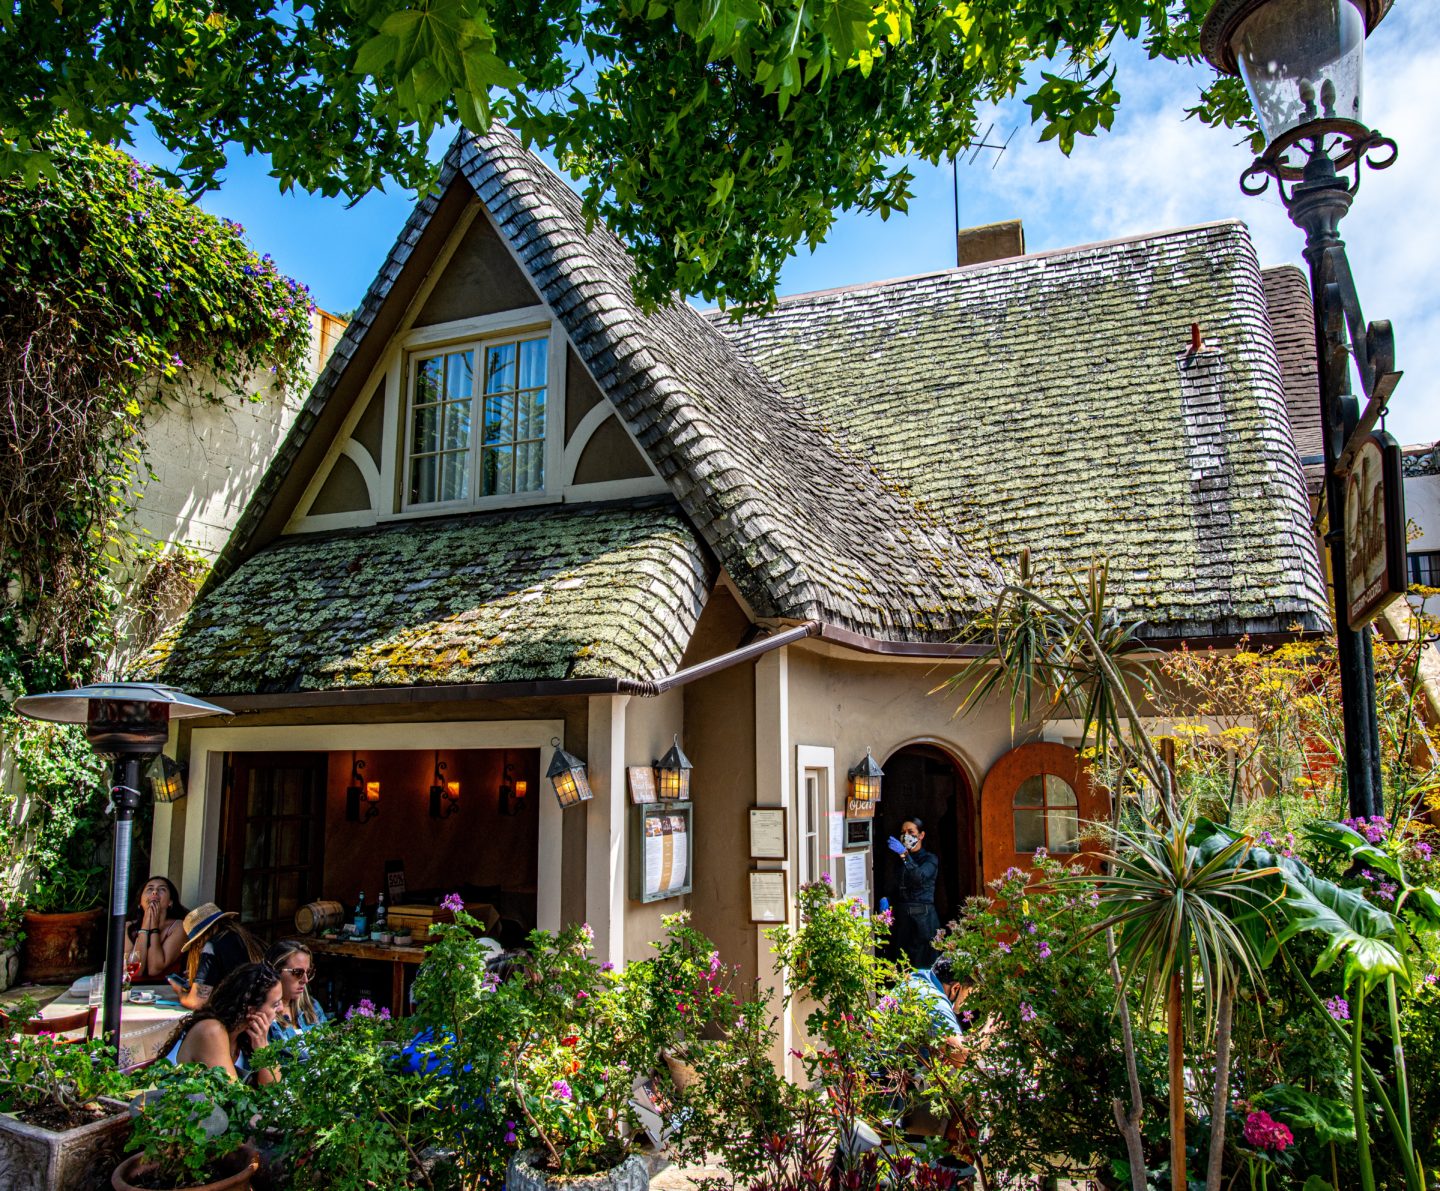 Top Things To Do In California: FAIRYTALE COTTAGES AT CARMEL BY THE SEA